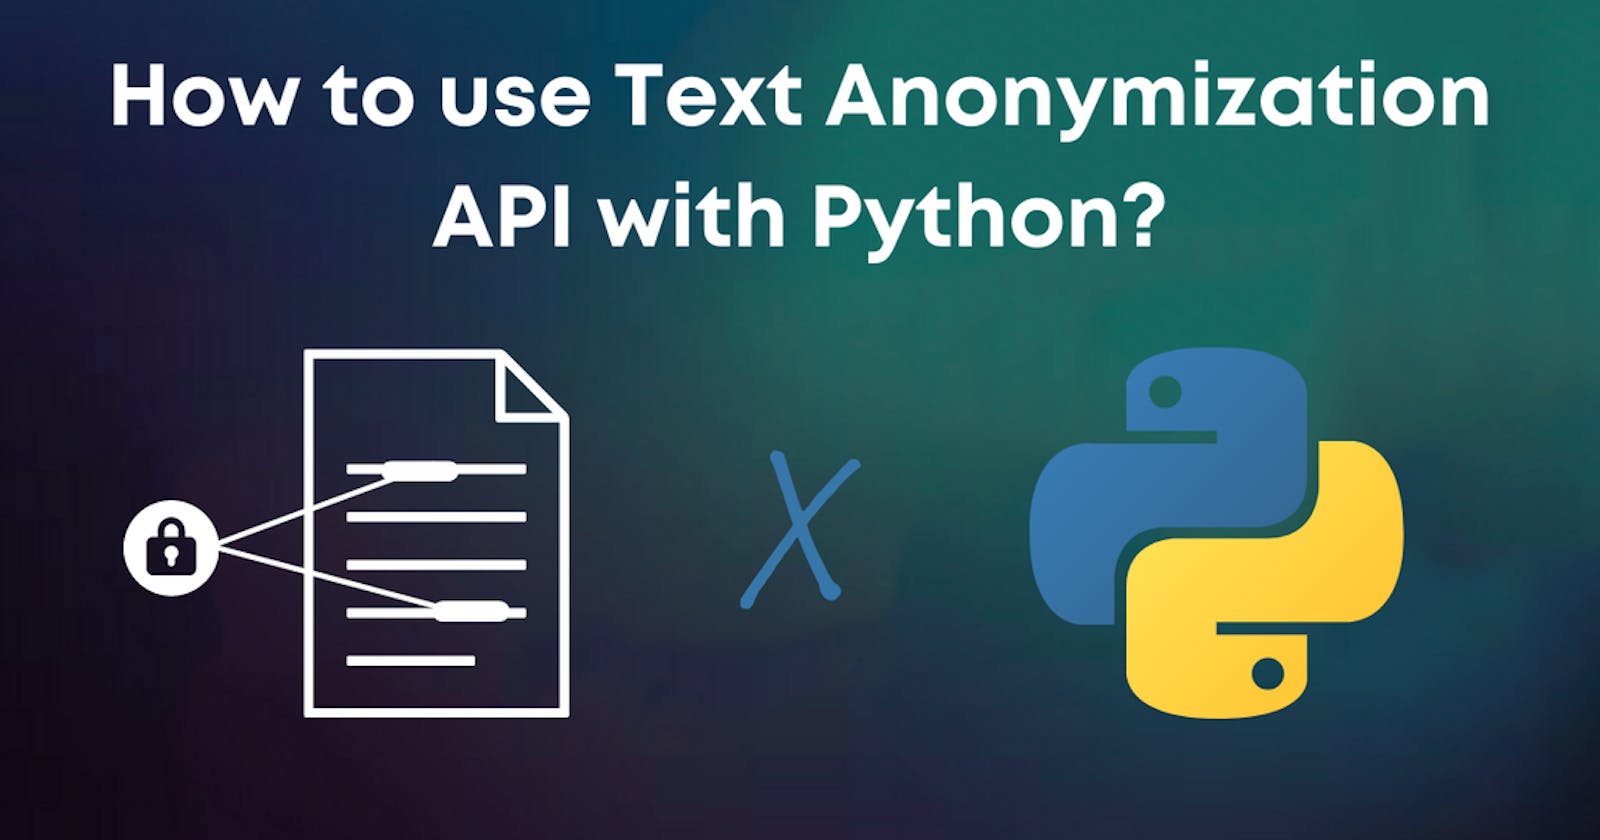 How to use Text Anonymization API with Python in 5 minutes?